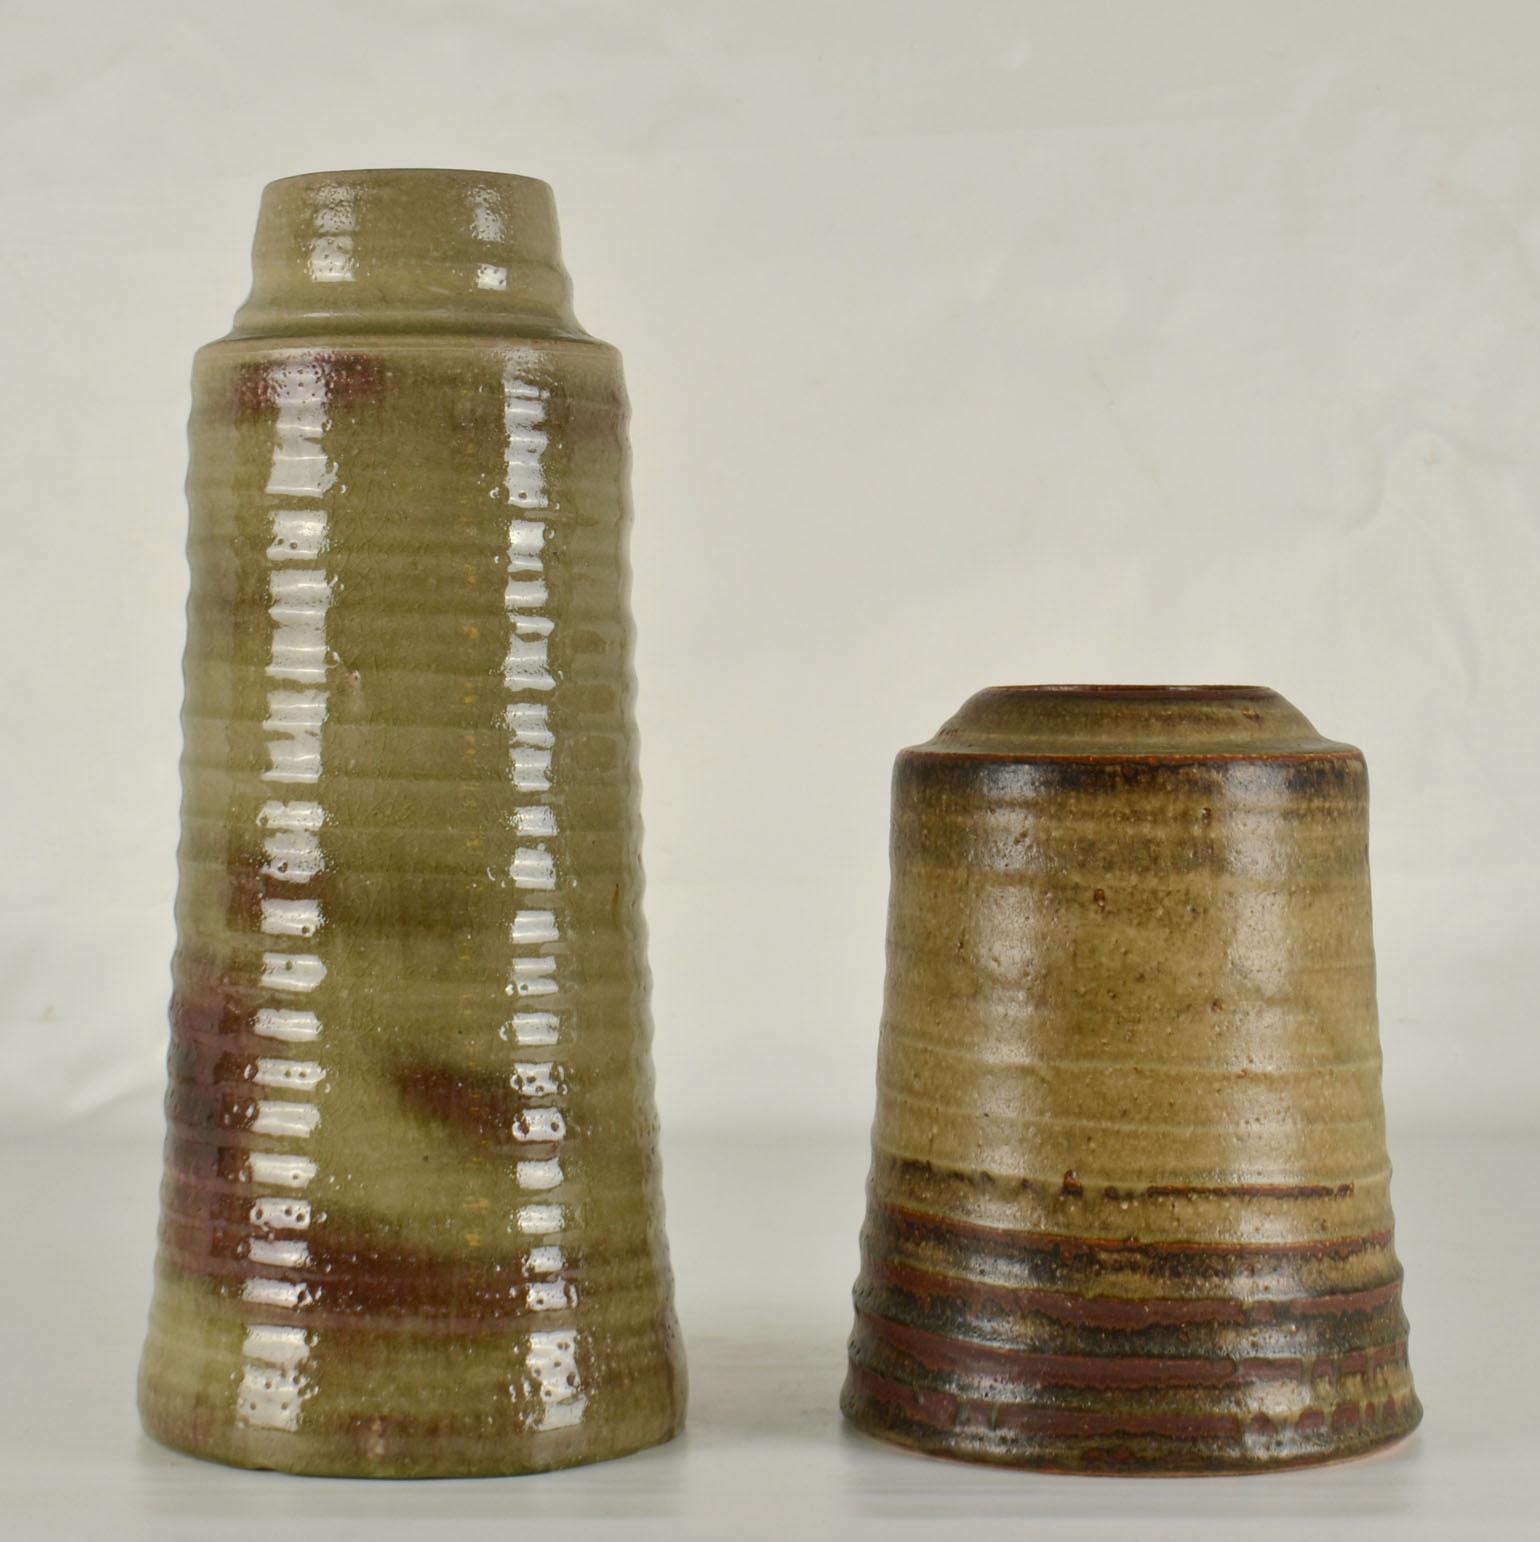 Tall Mid Century Ceramic Studio Vases in Earth Tones by Mobach For Sale 1